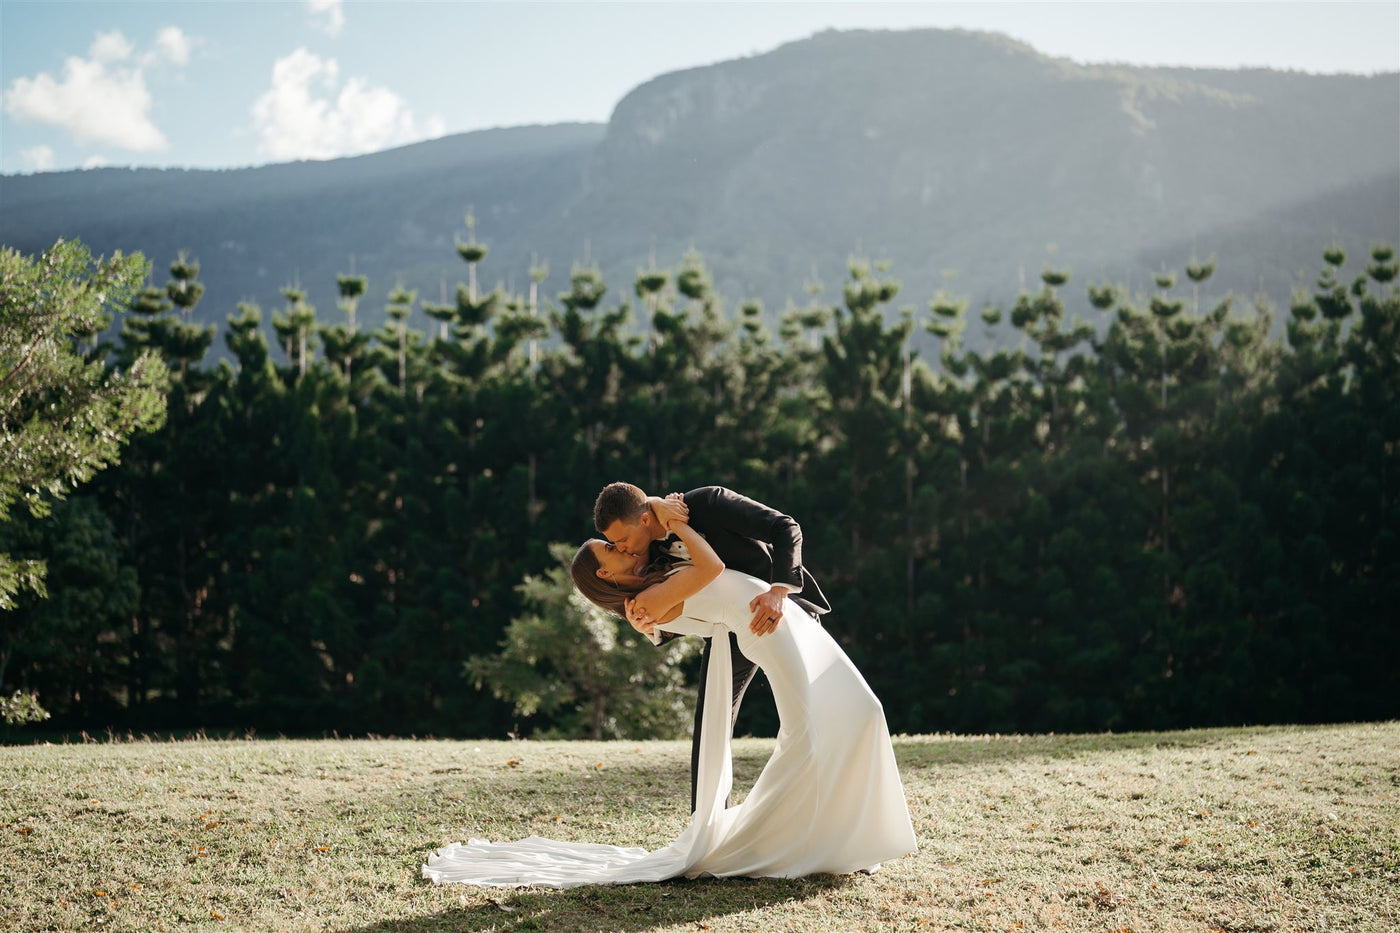 Newlywed couple kissing in a scenic mountain view wedding venue